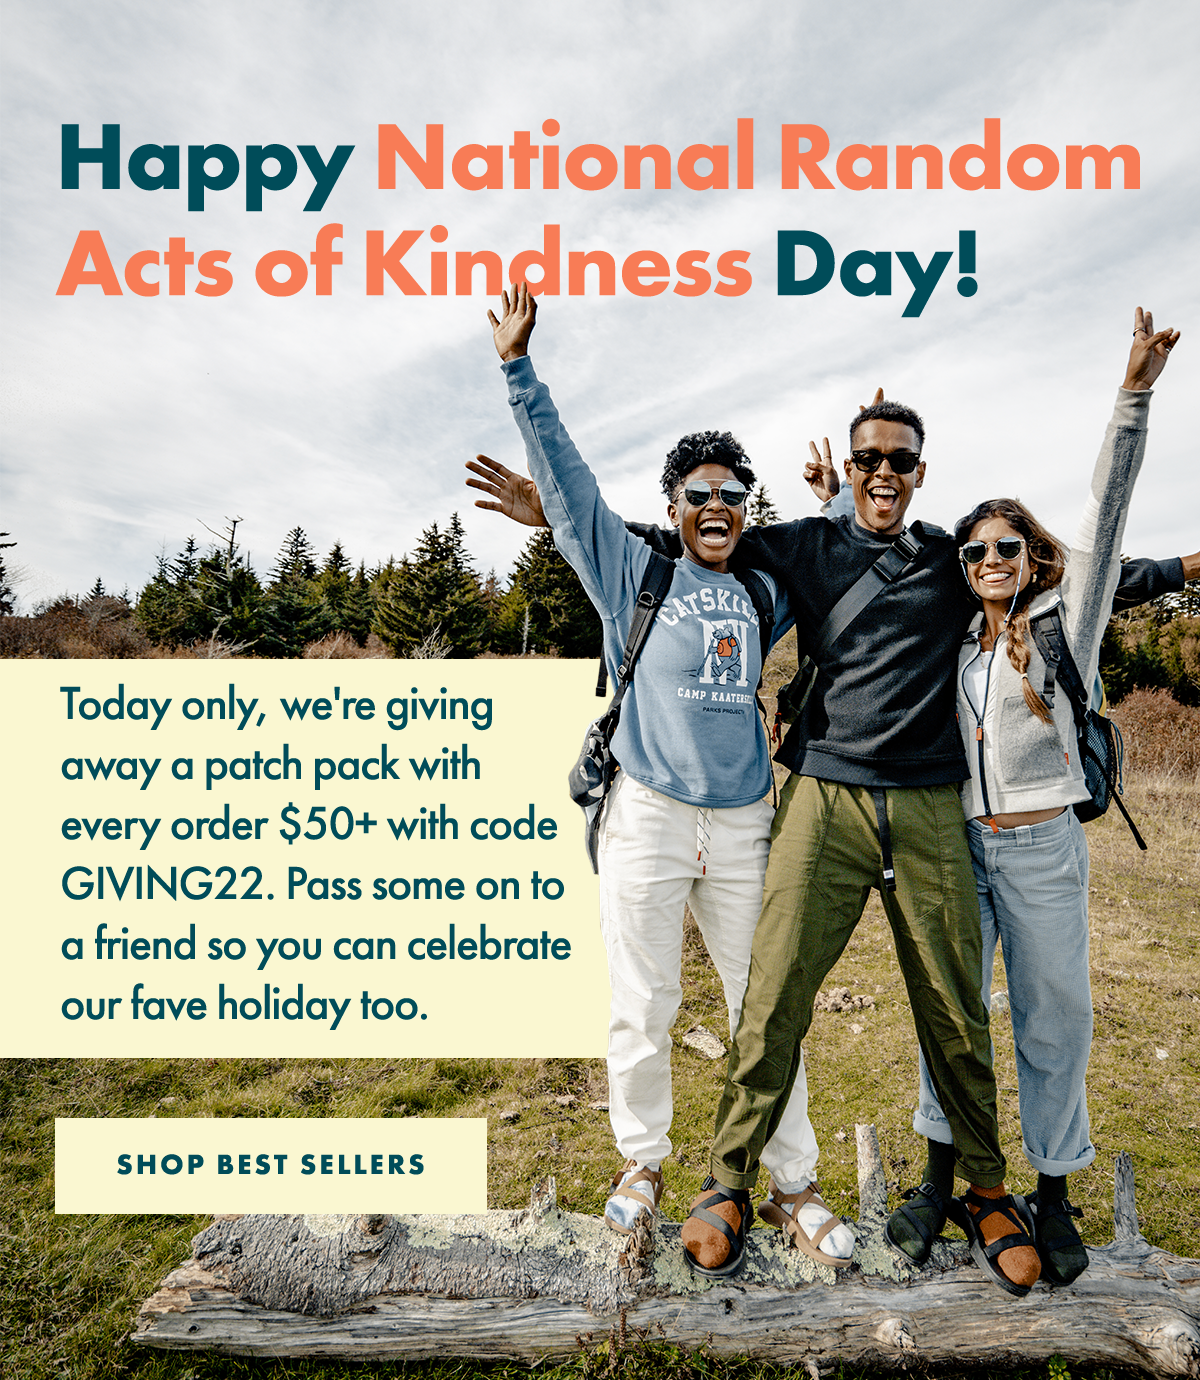 Happy National Random Acts of Kindness Day! Today only, we're giving away a patch pack with every order $50+ with code GIVING22. Pass some on to a friend so you can celebrate our fave holiday too. SHOP BEST SELLERS